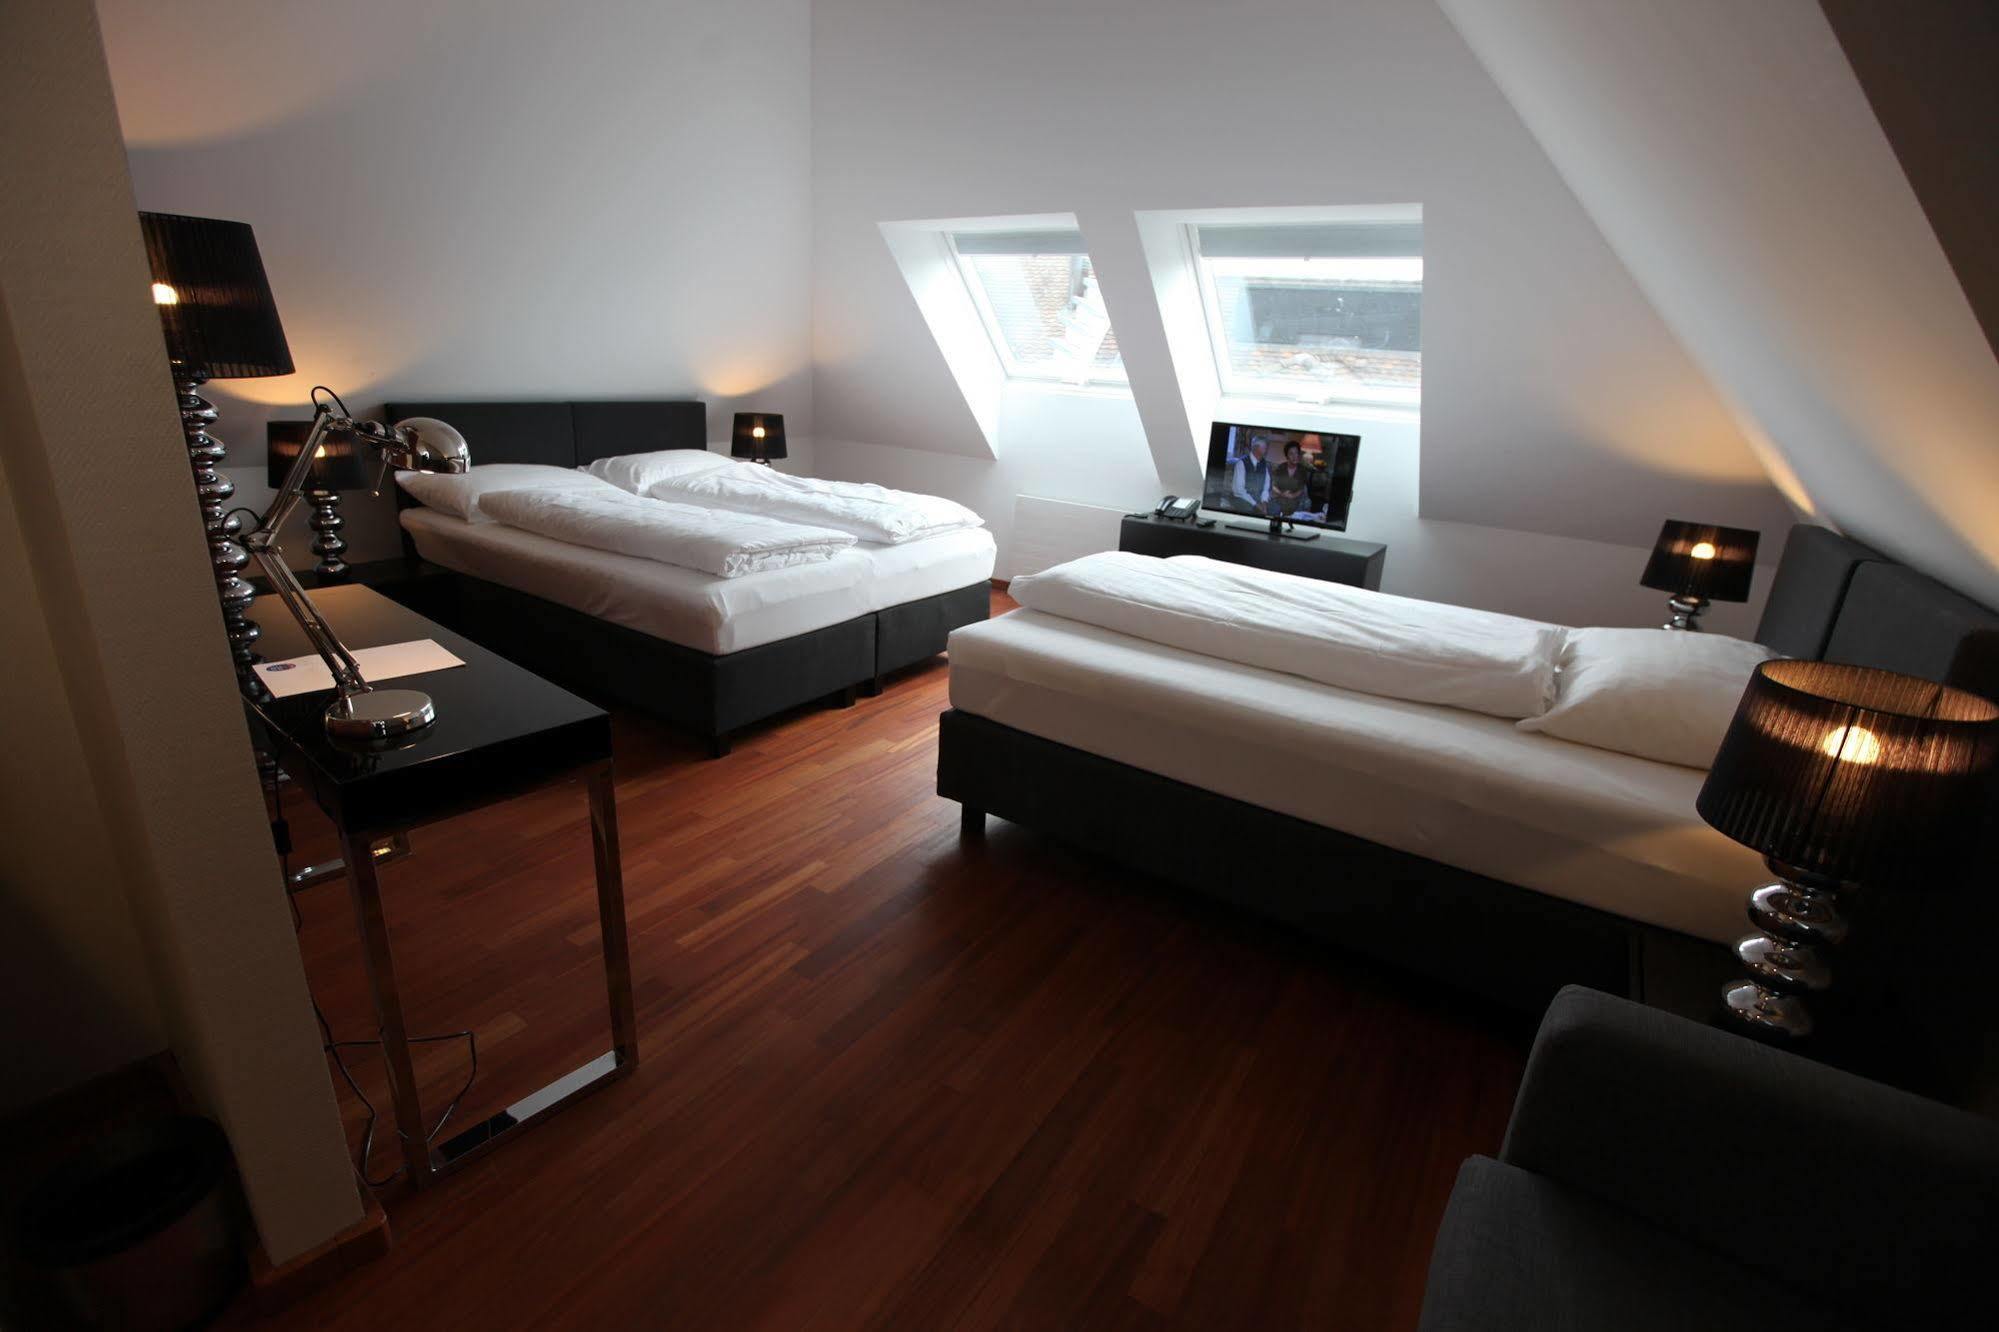 The Lubo - Self Check-In Hotel Lucerne ภายนอก รูปภาพ